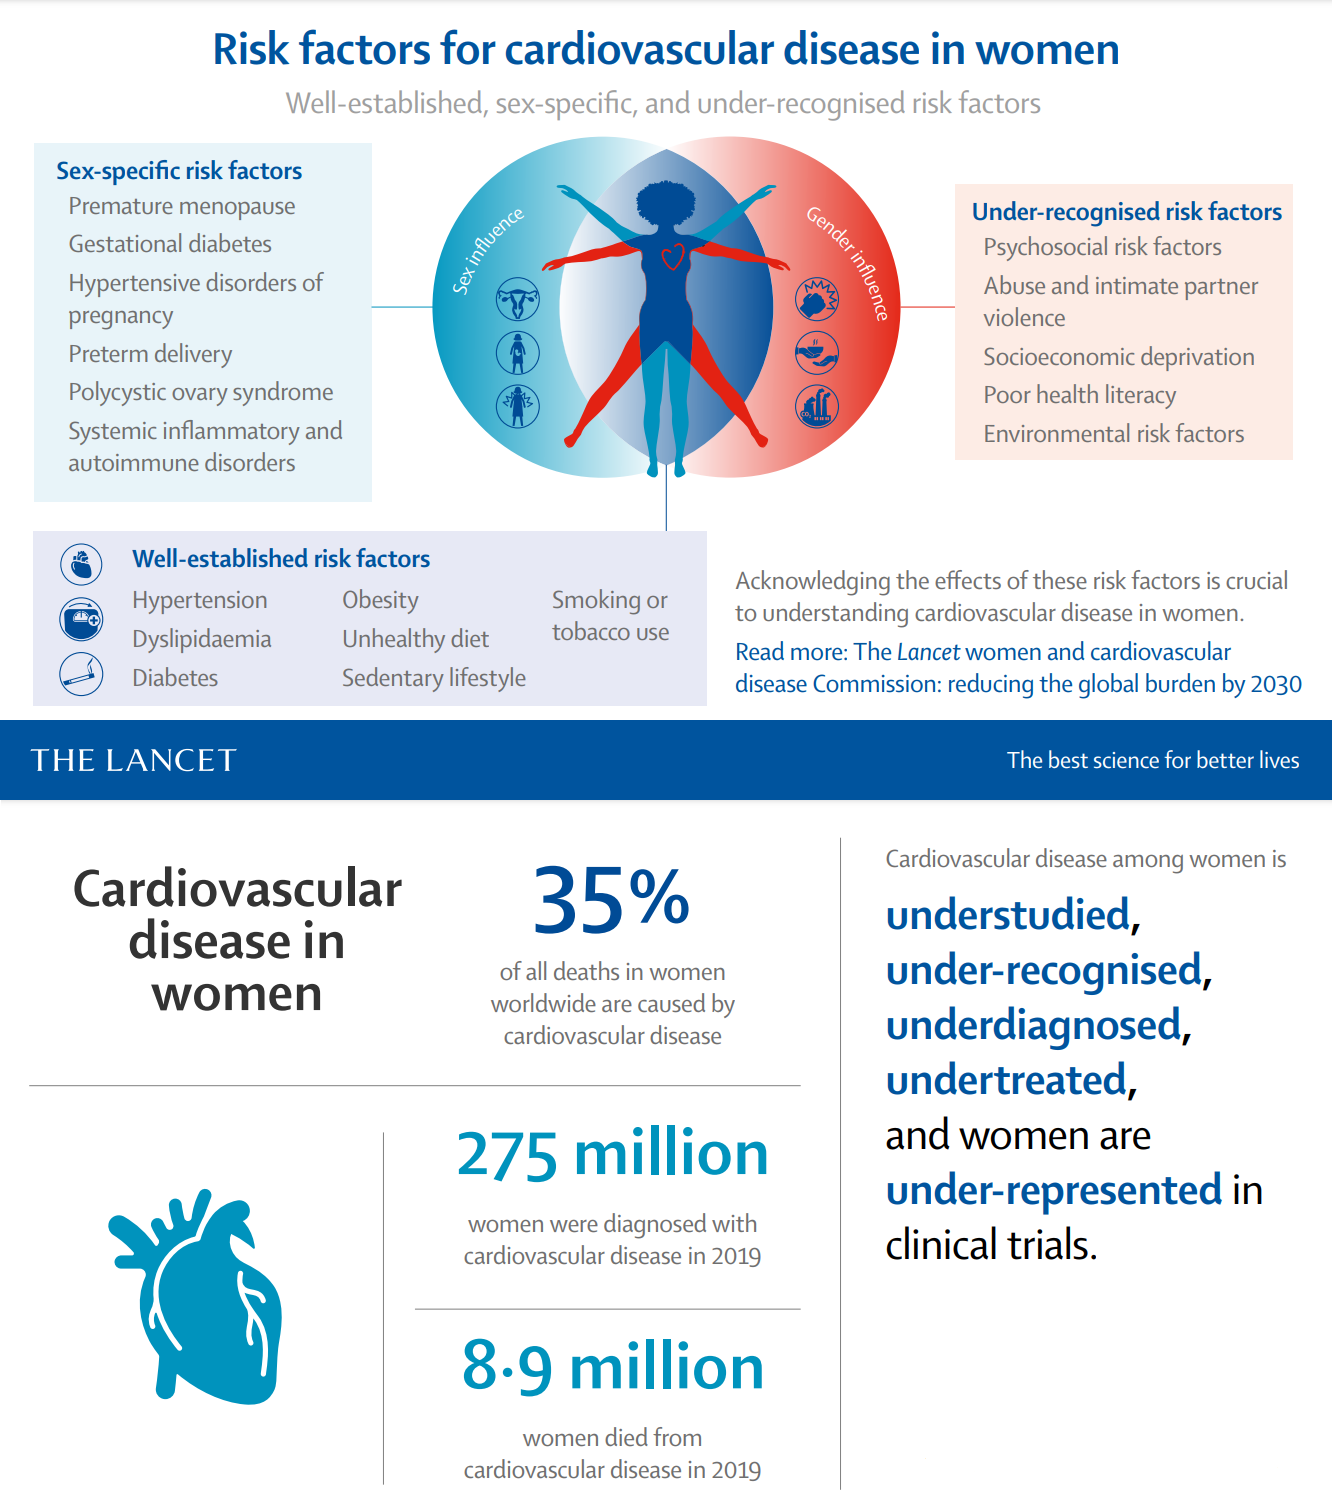 The Lancet women and cardiovascular disease Commission: reducing the global burden by 2030